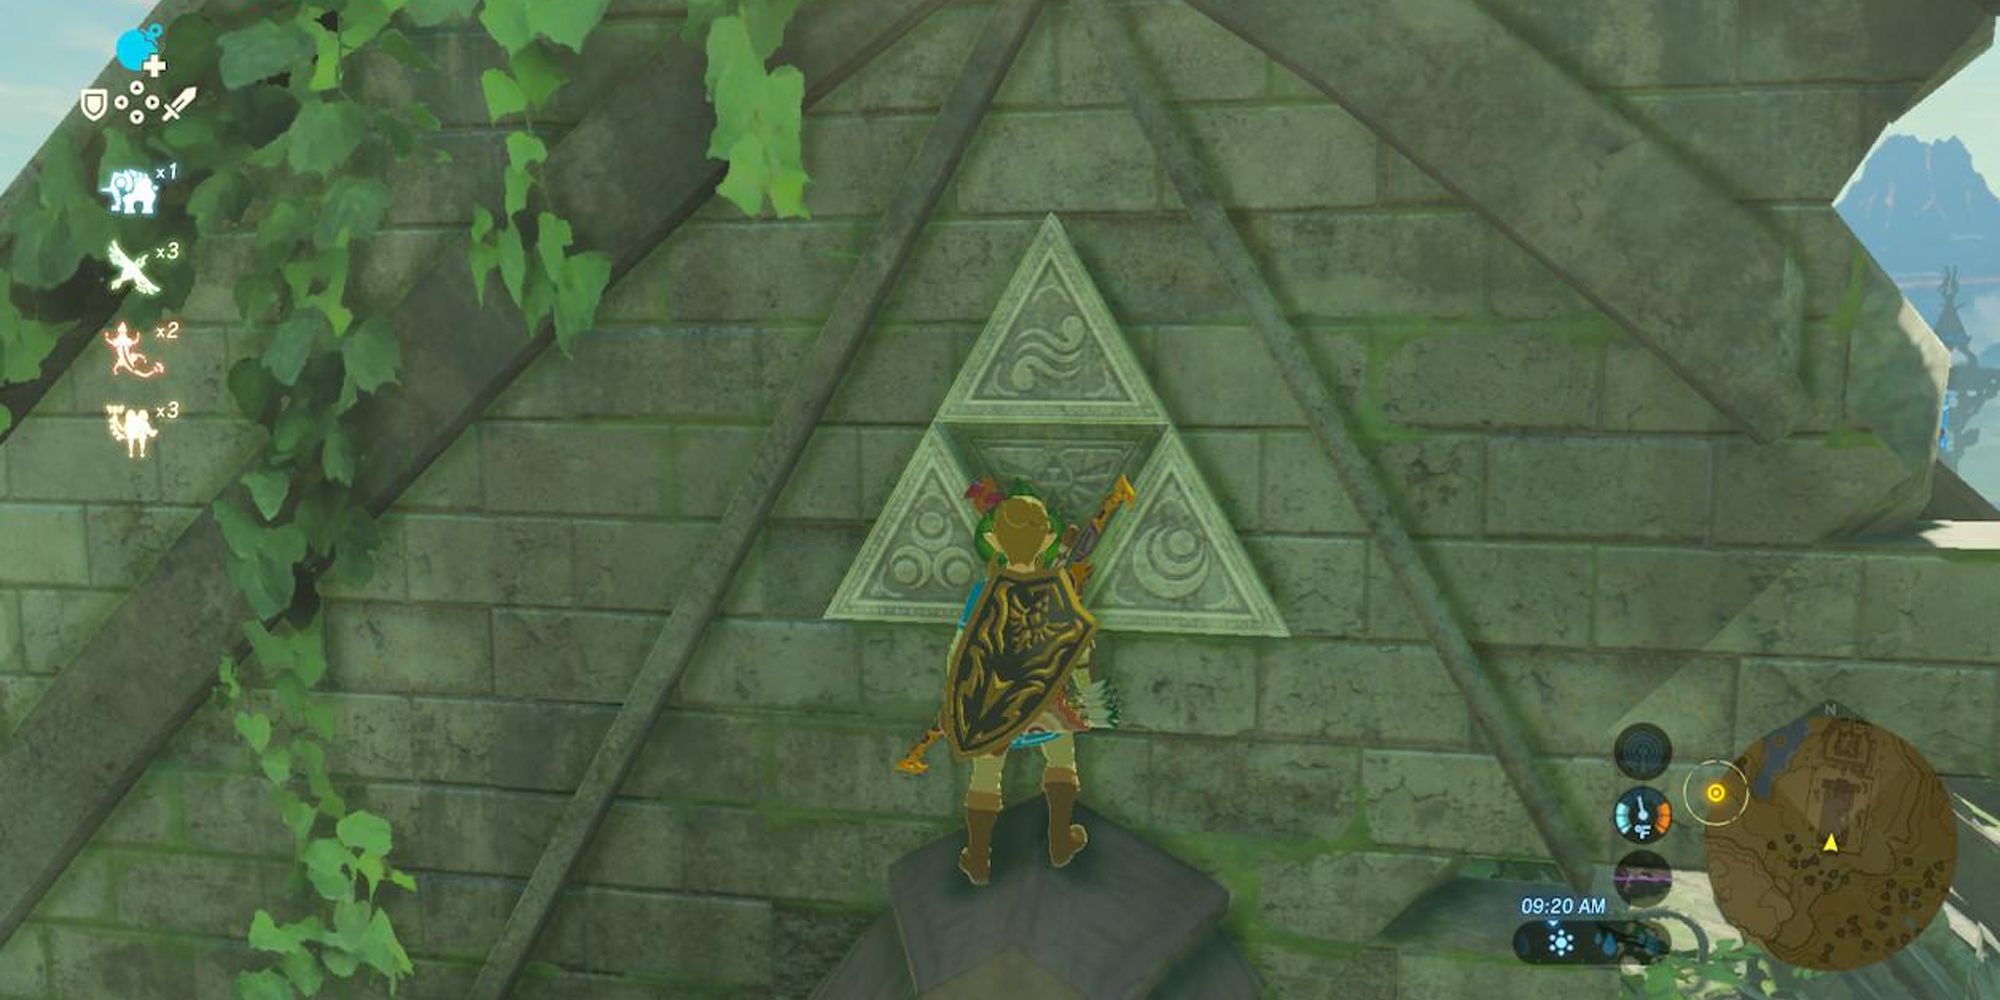 Link looks at Triforce